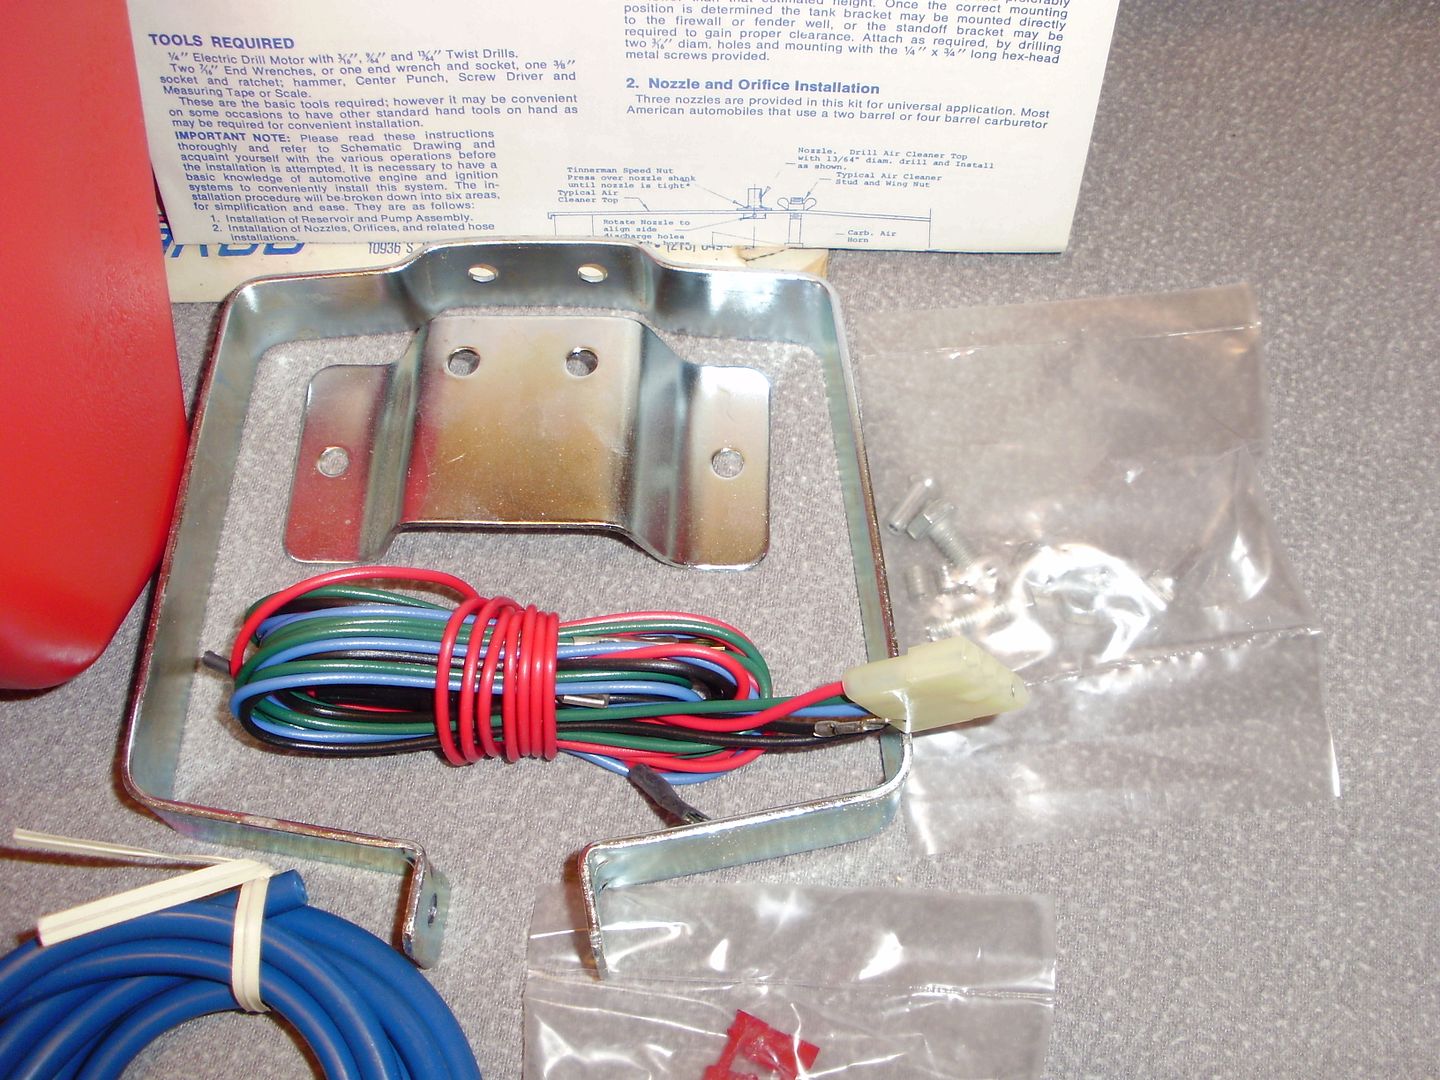  photo NOS SPEARCO INJECTRONIC WATER INJECTION SYSTEM PART 900 021_zpsvioybmca.jpg